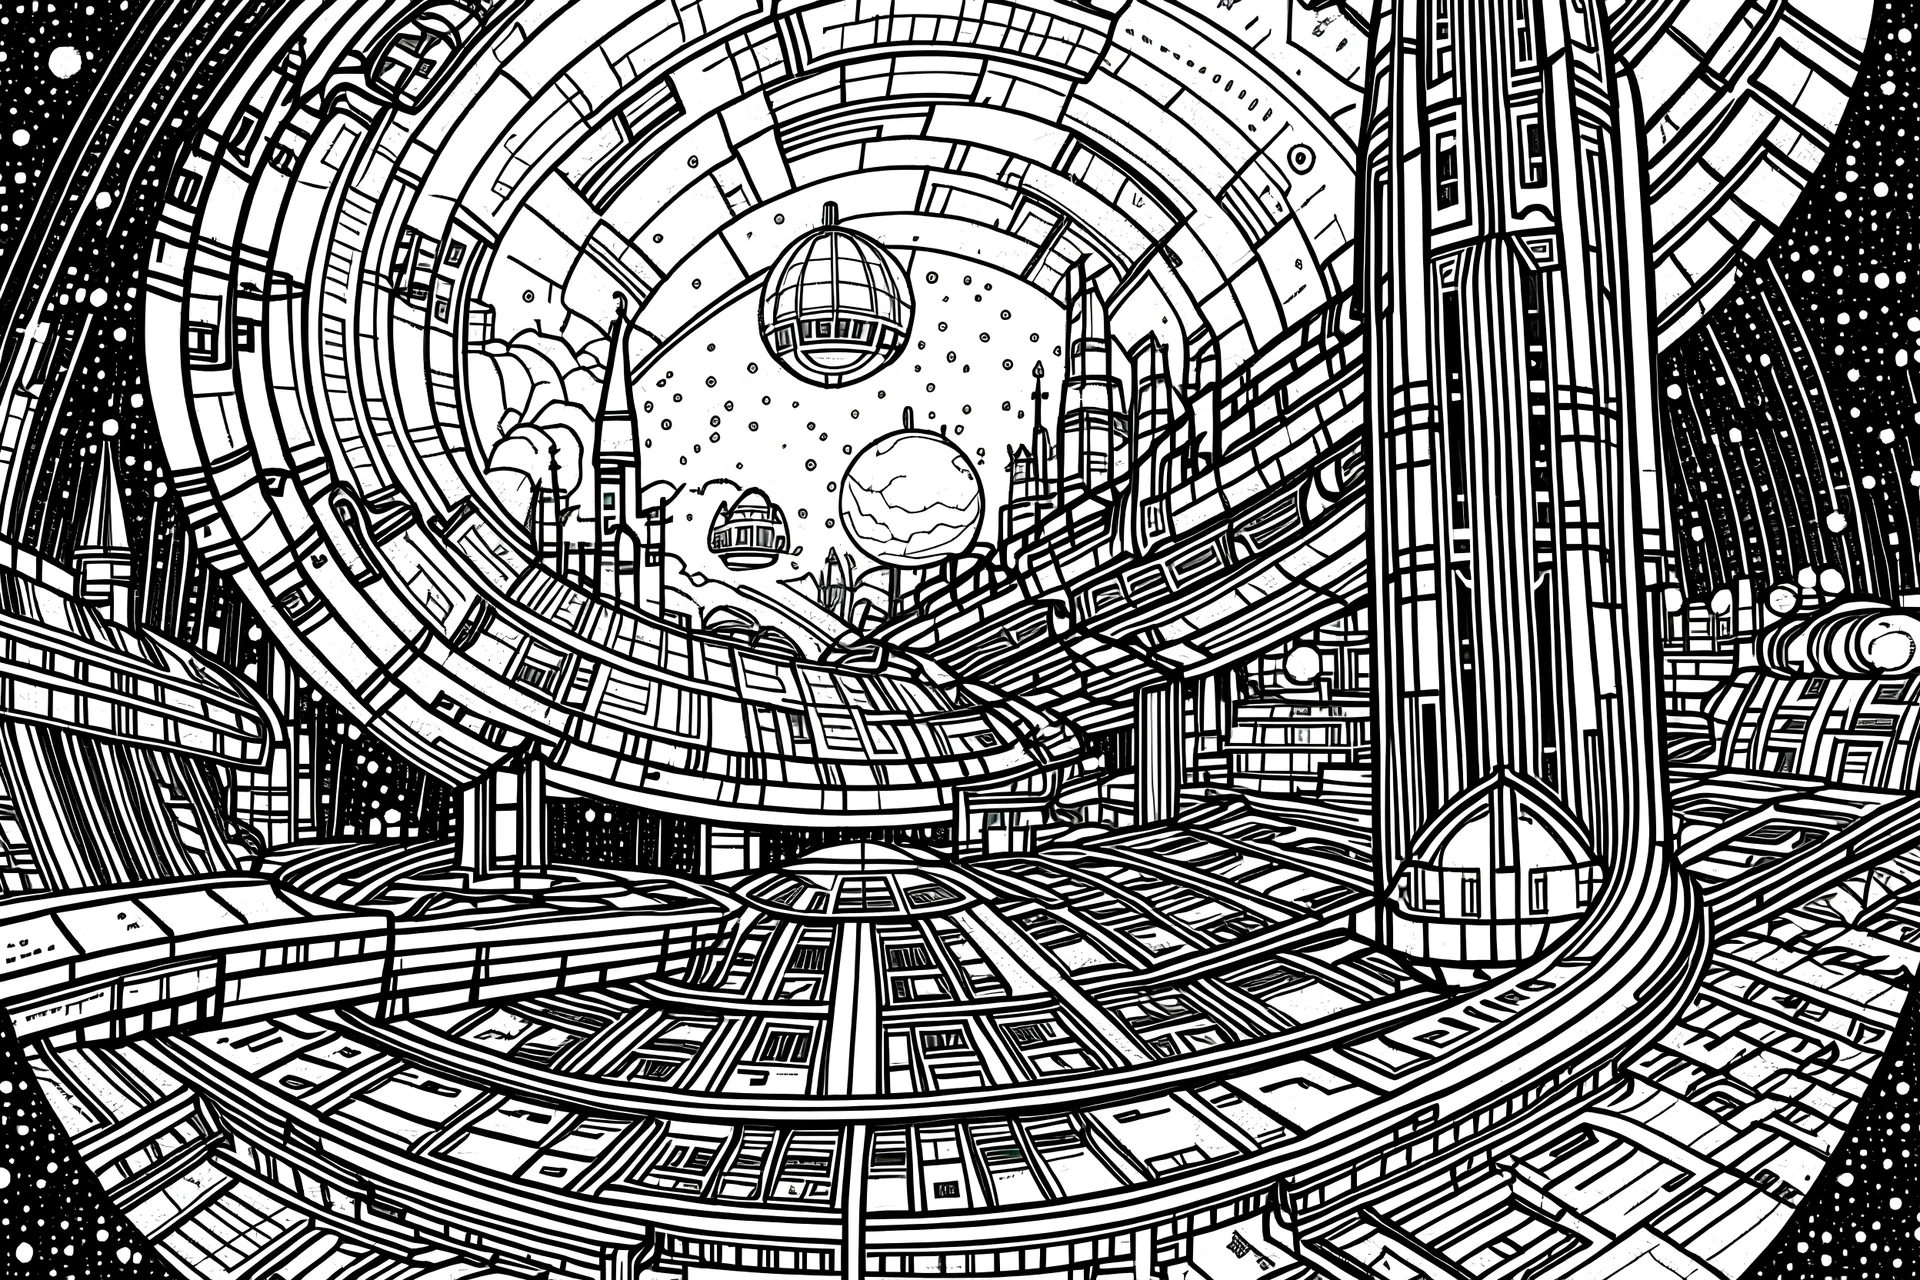 Visualize a black & white coloring book with thick contours and lines, all fitting within an 11x8.5 inch space. Diverse starships, each with distinct designs and functions, offering a cosmic coloring adventure.